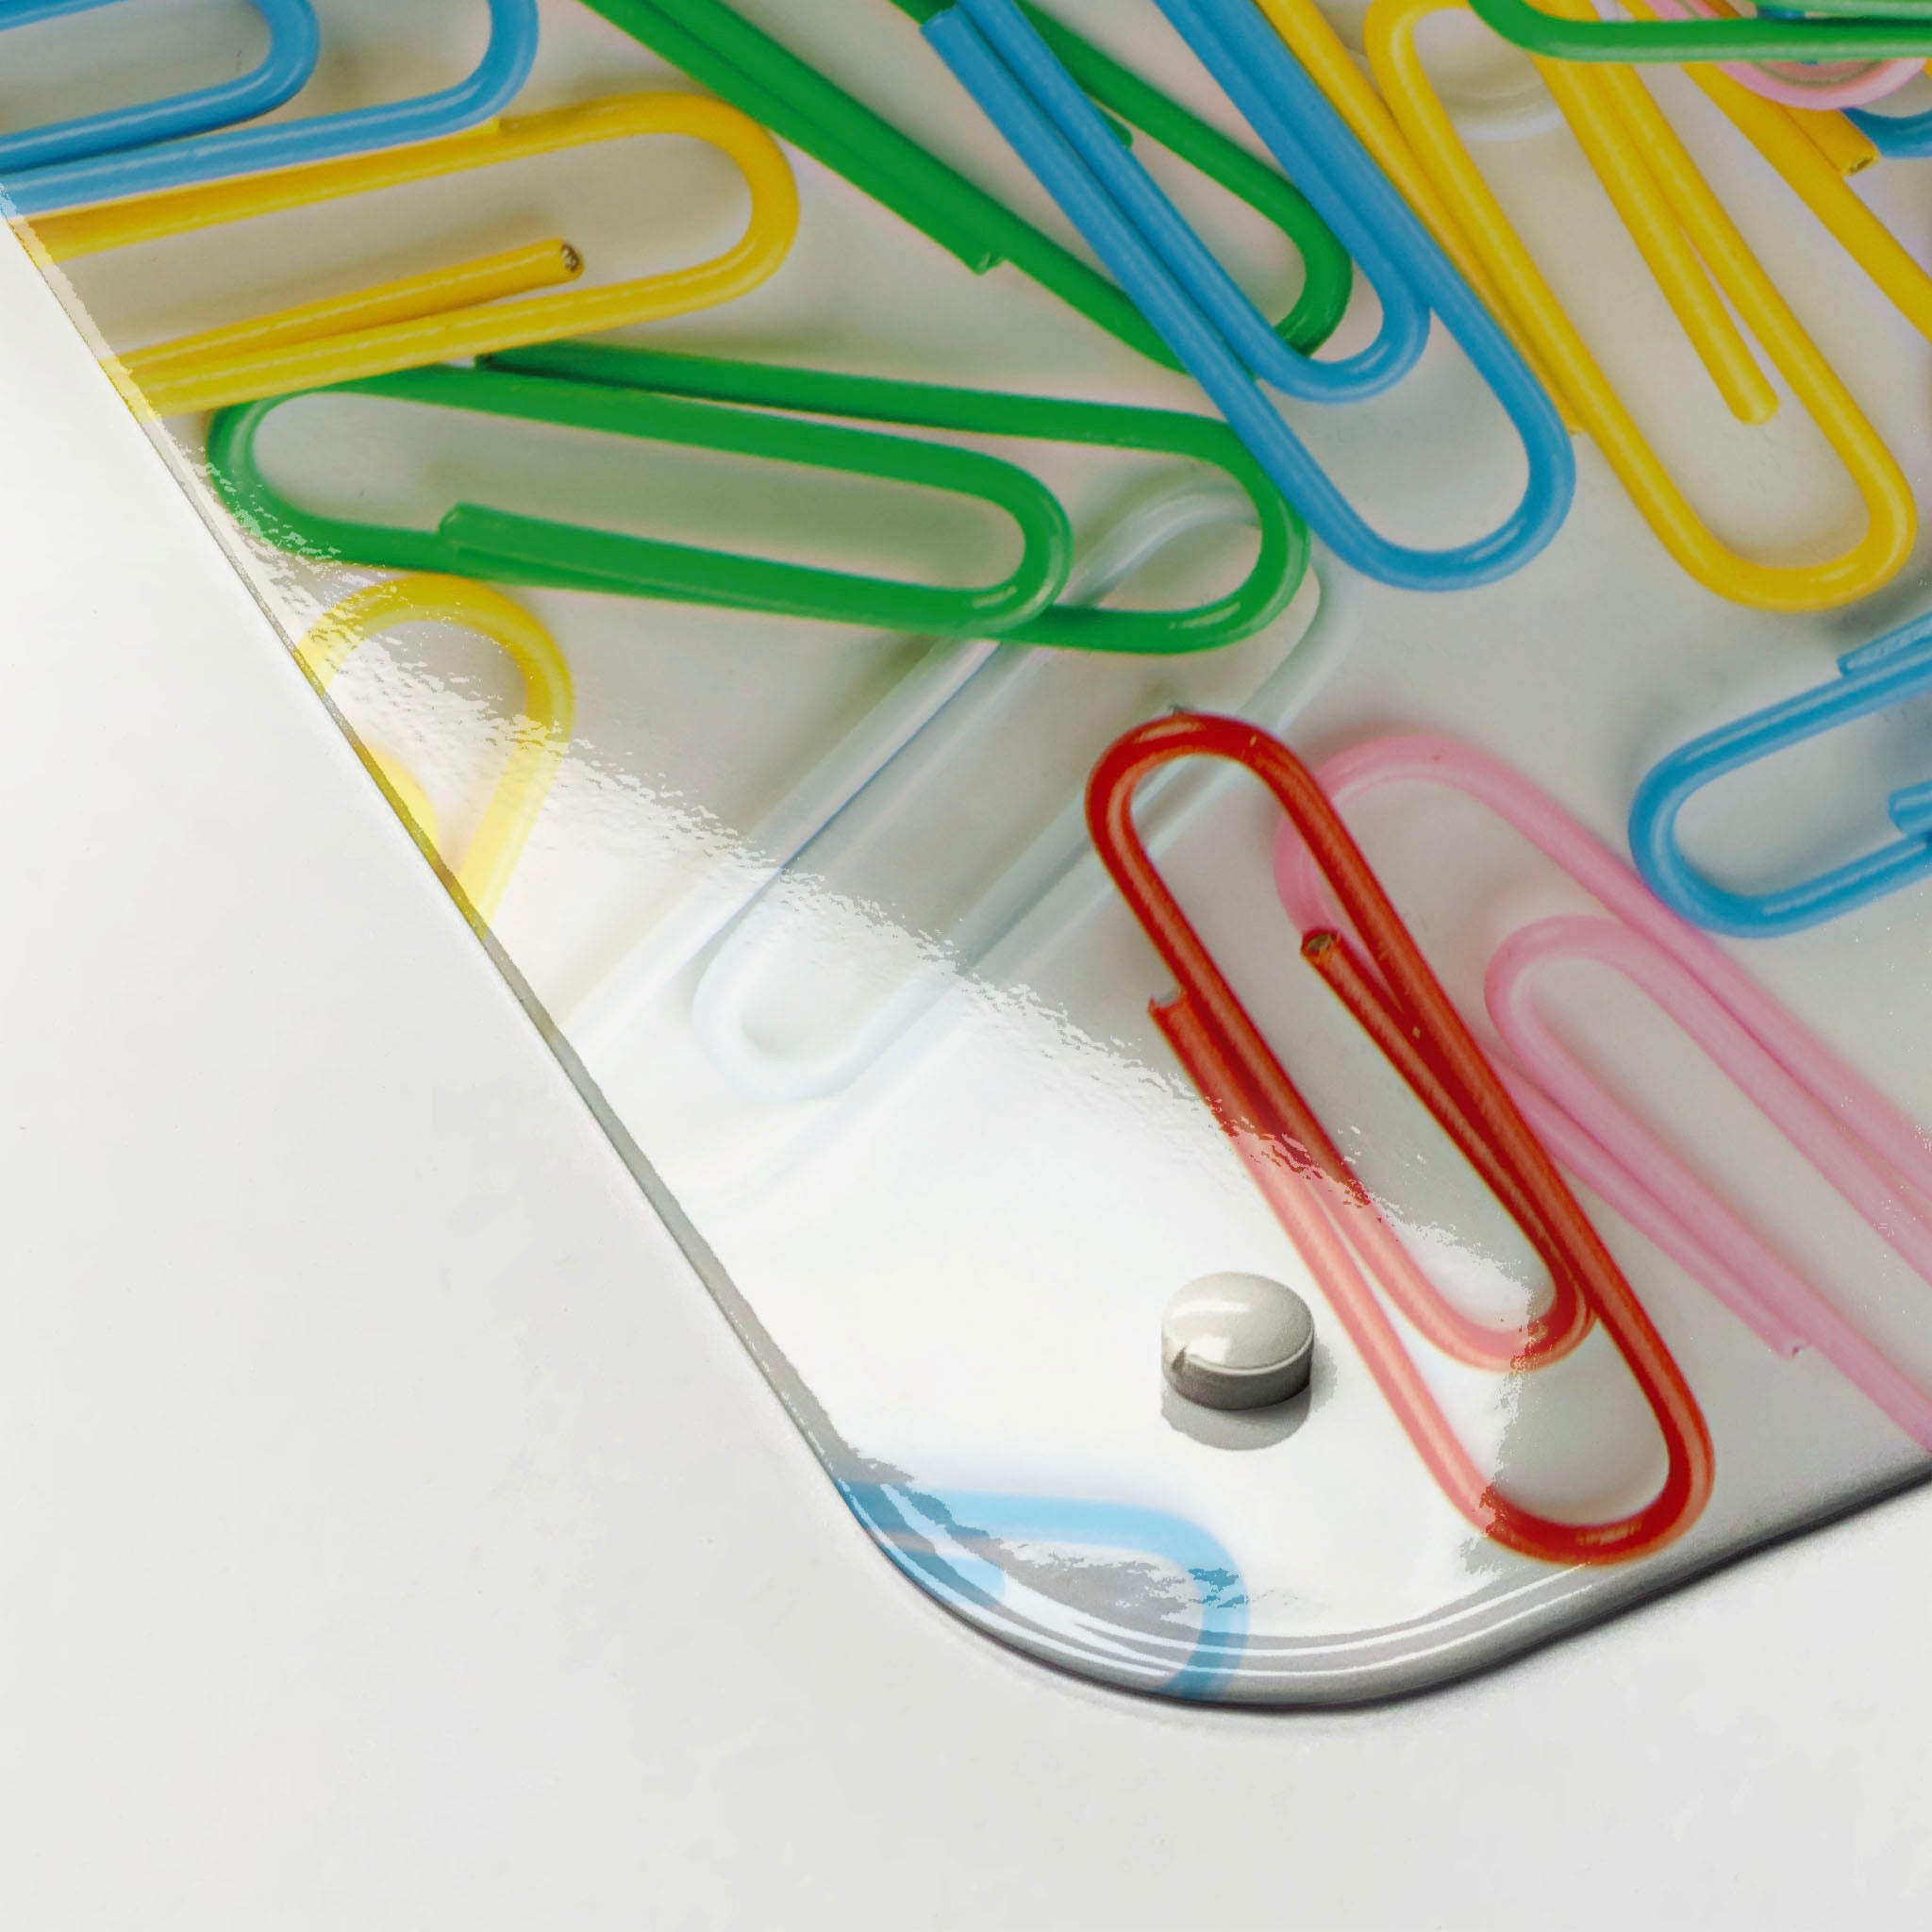 The corner detail of a paper clips photographic magnetic board to show it’s high gloss surface